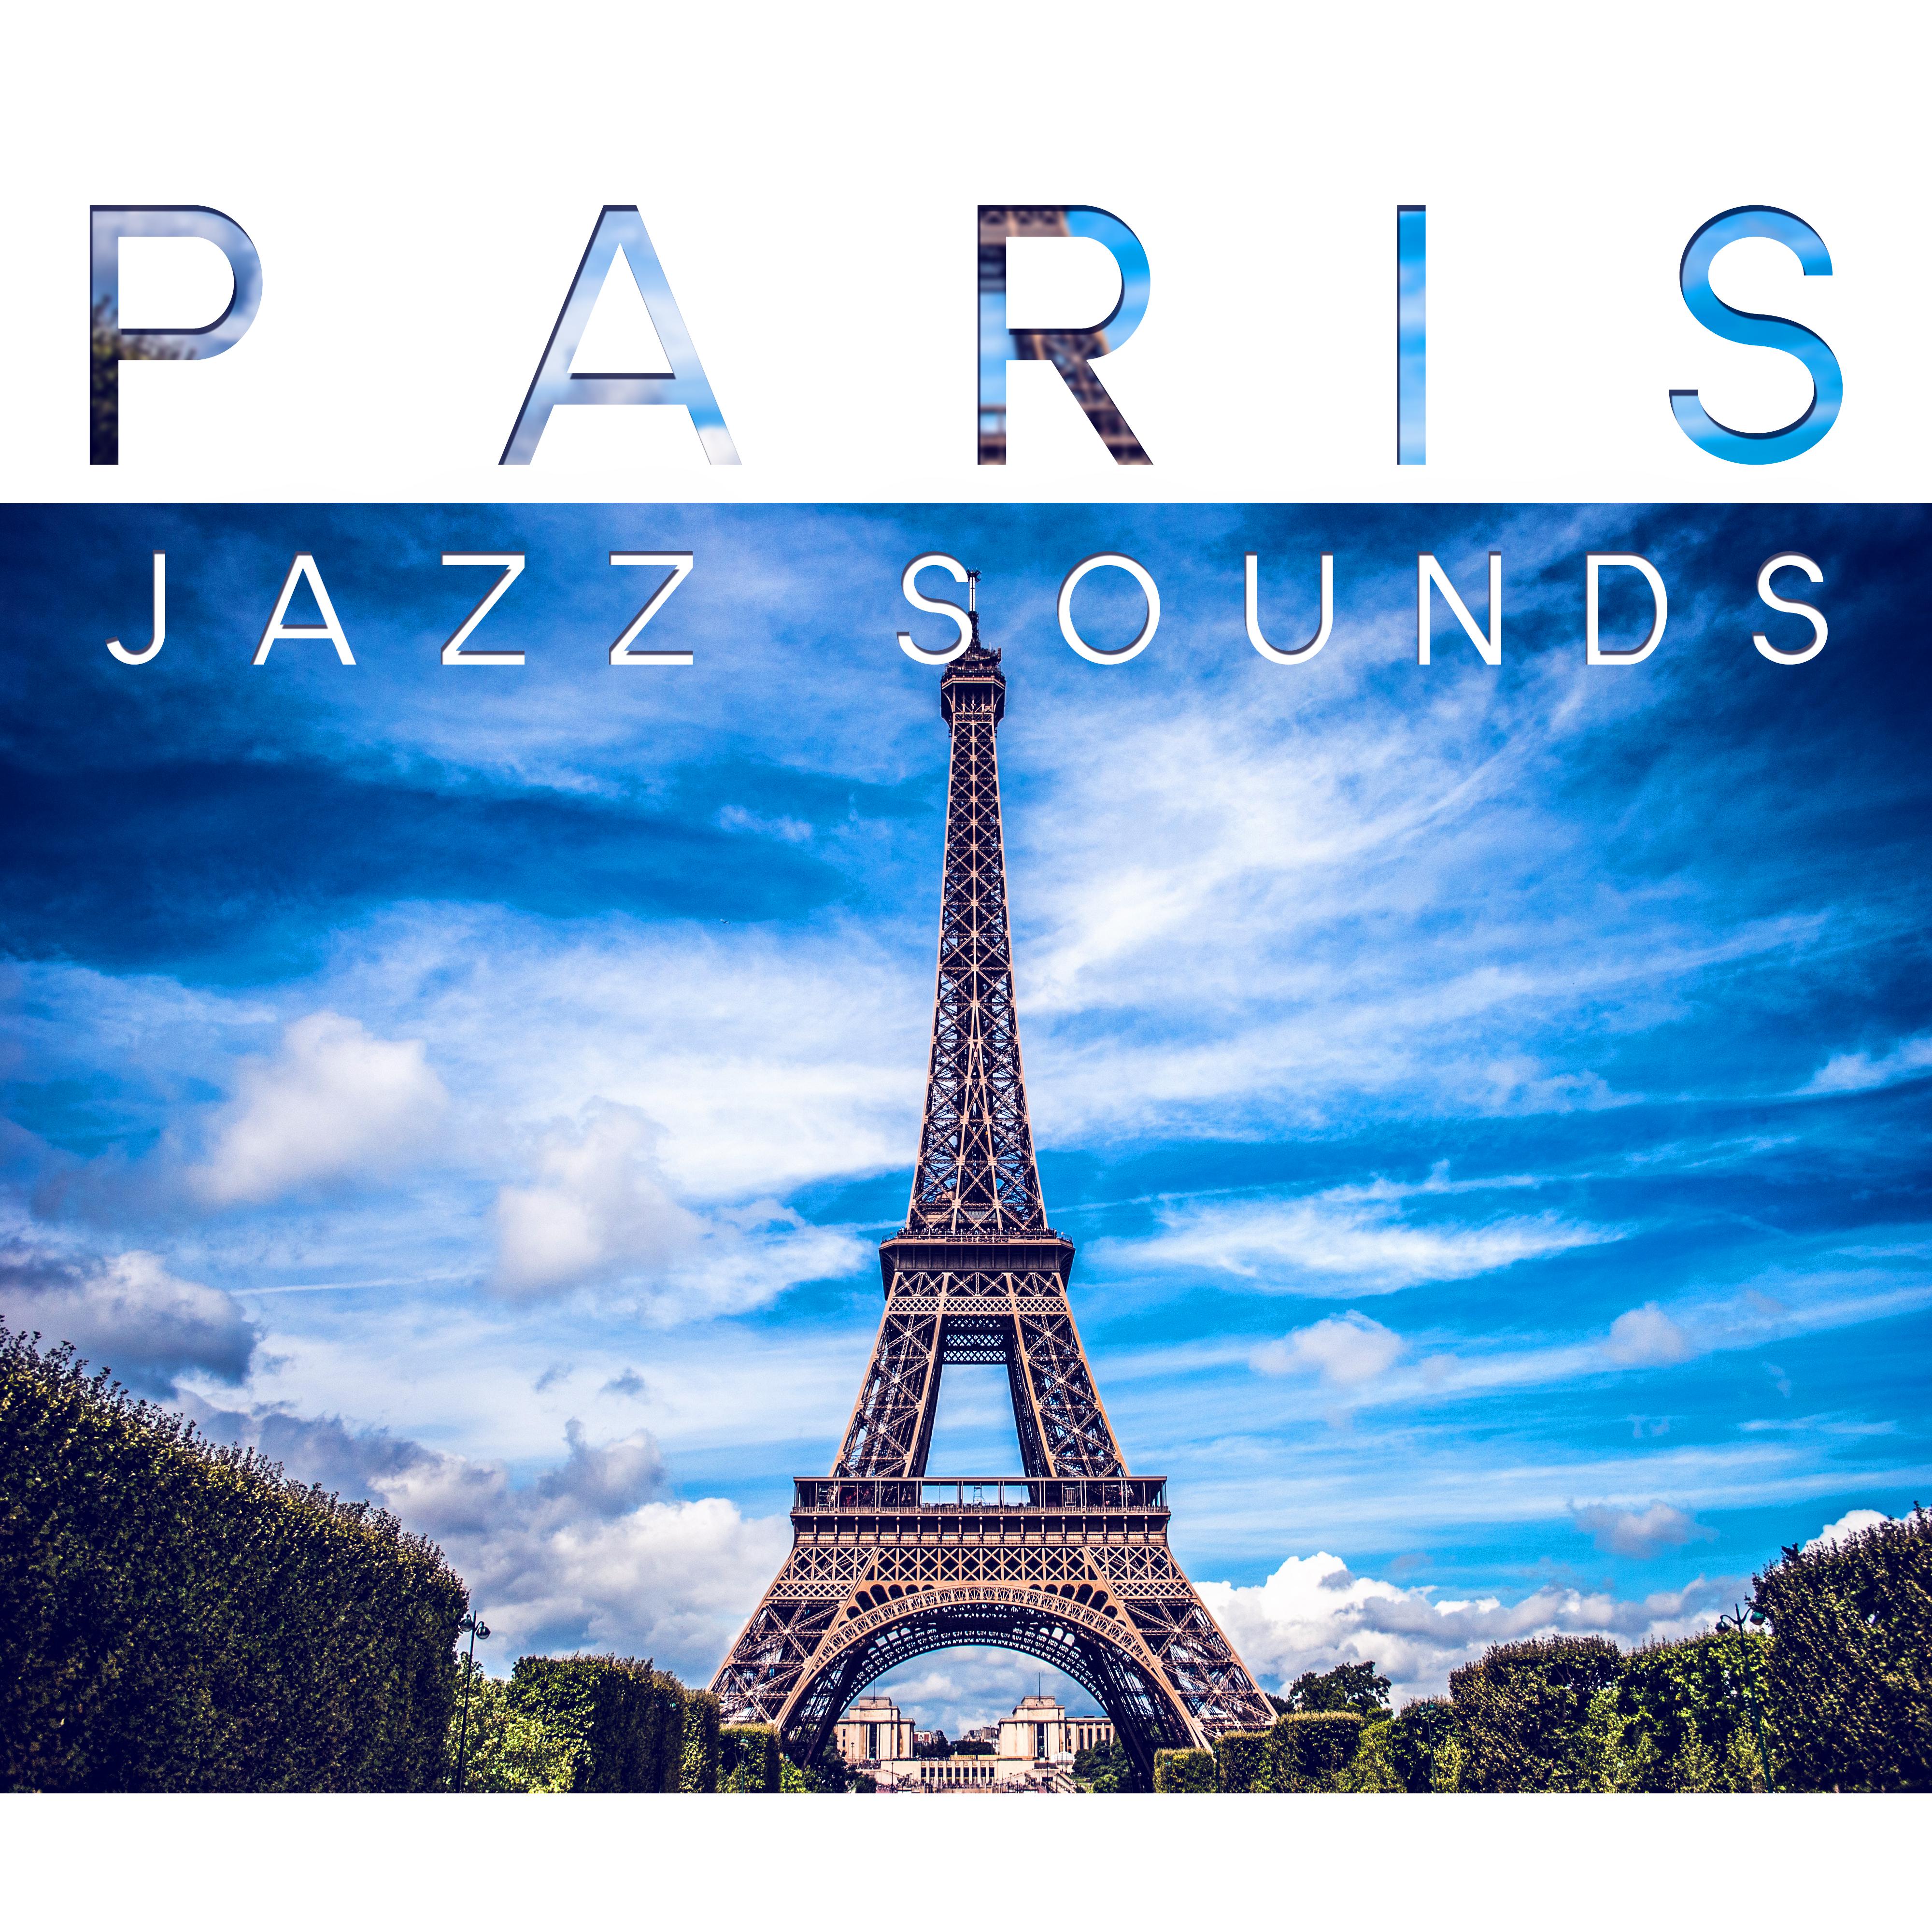 Paris Jazz Sounds  Feel Atmosphere Paris Cafe with Lovely Jazz, Easy Listening Piano Jazz is the Best Background Music to Restaurant  Cafe